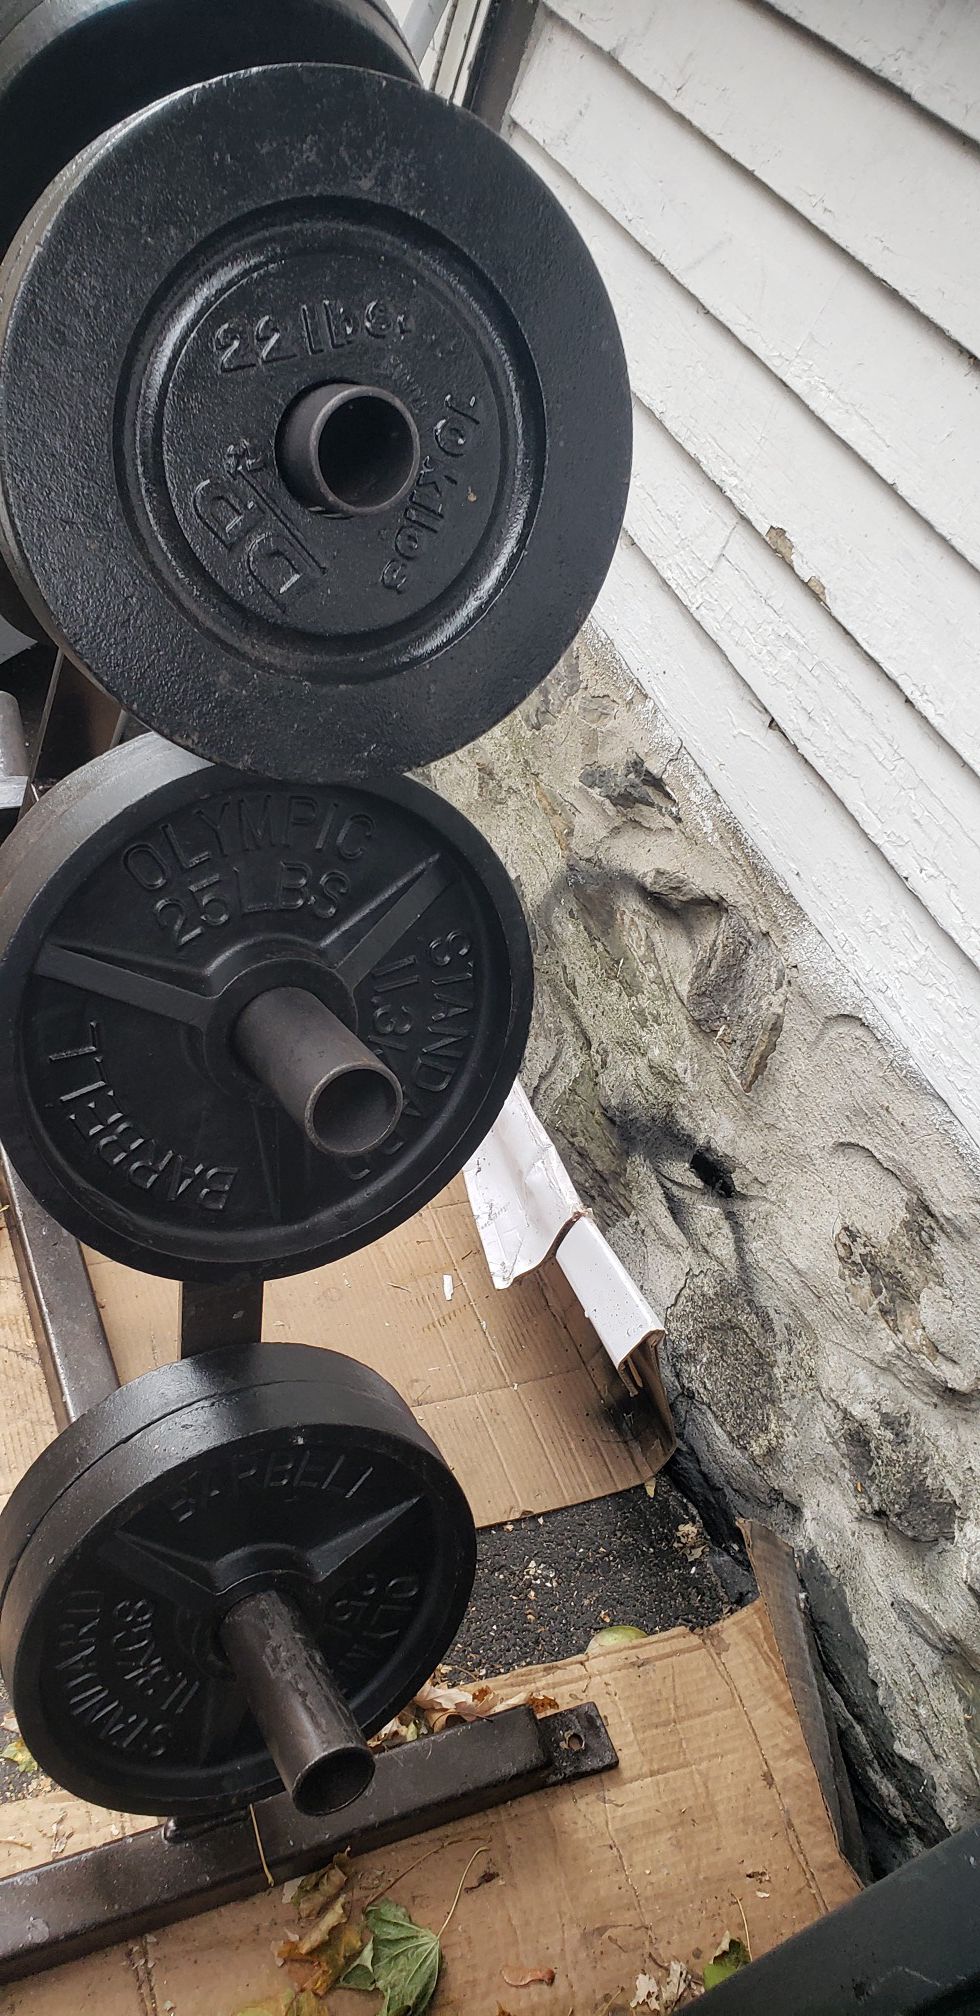 Olympic plates and barbells